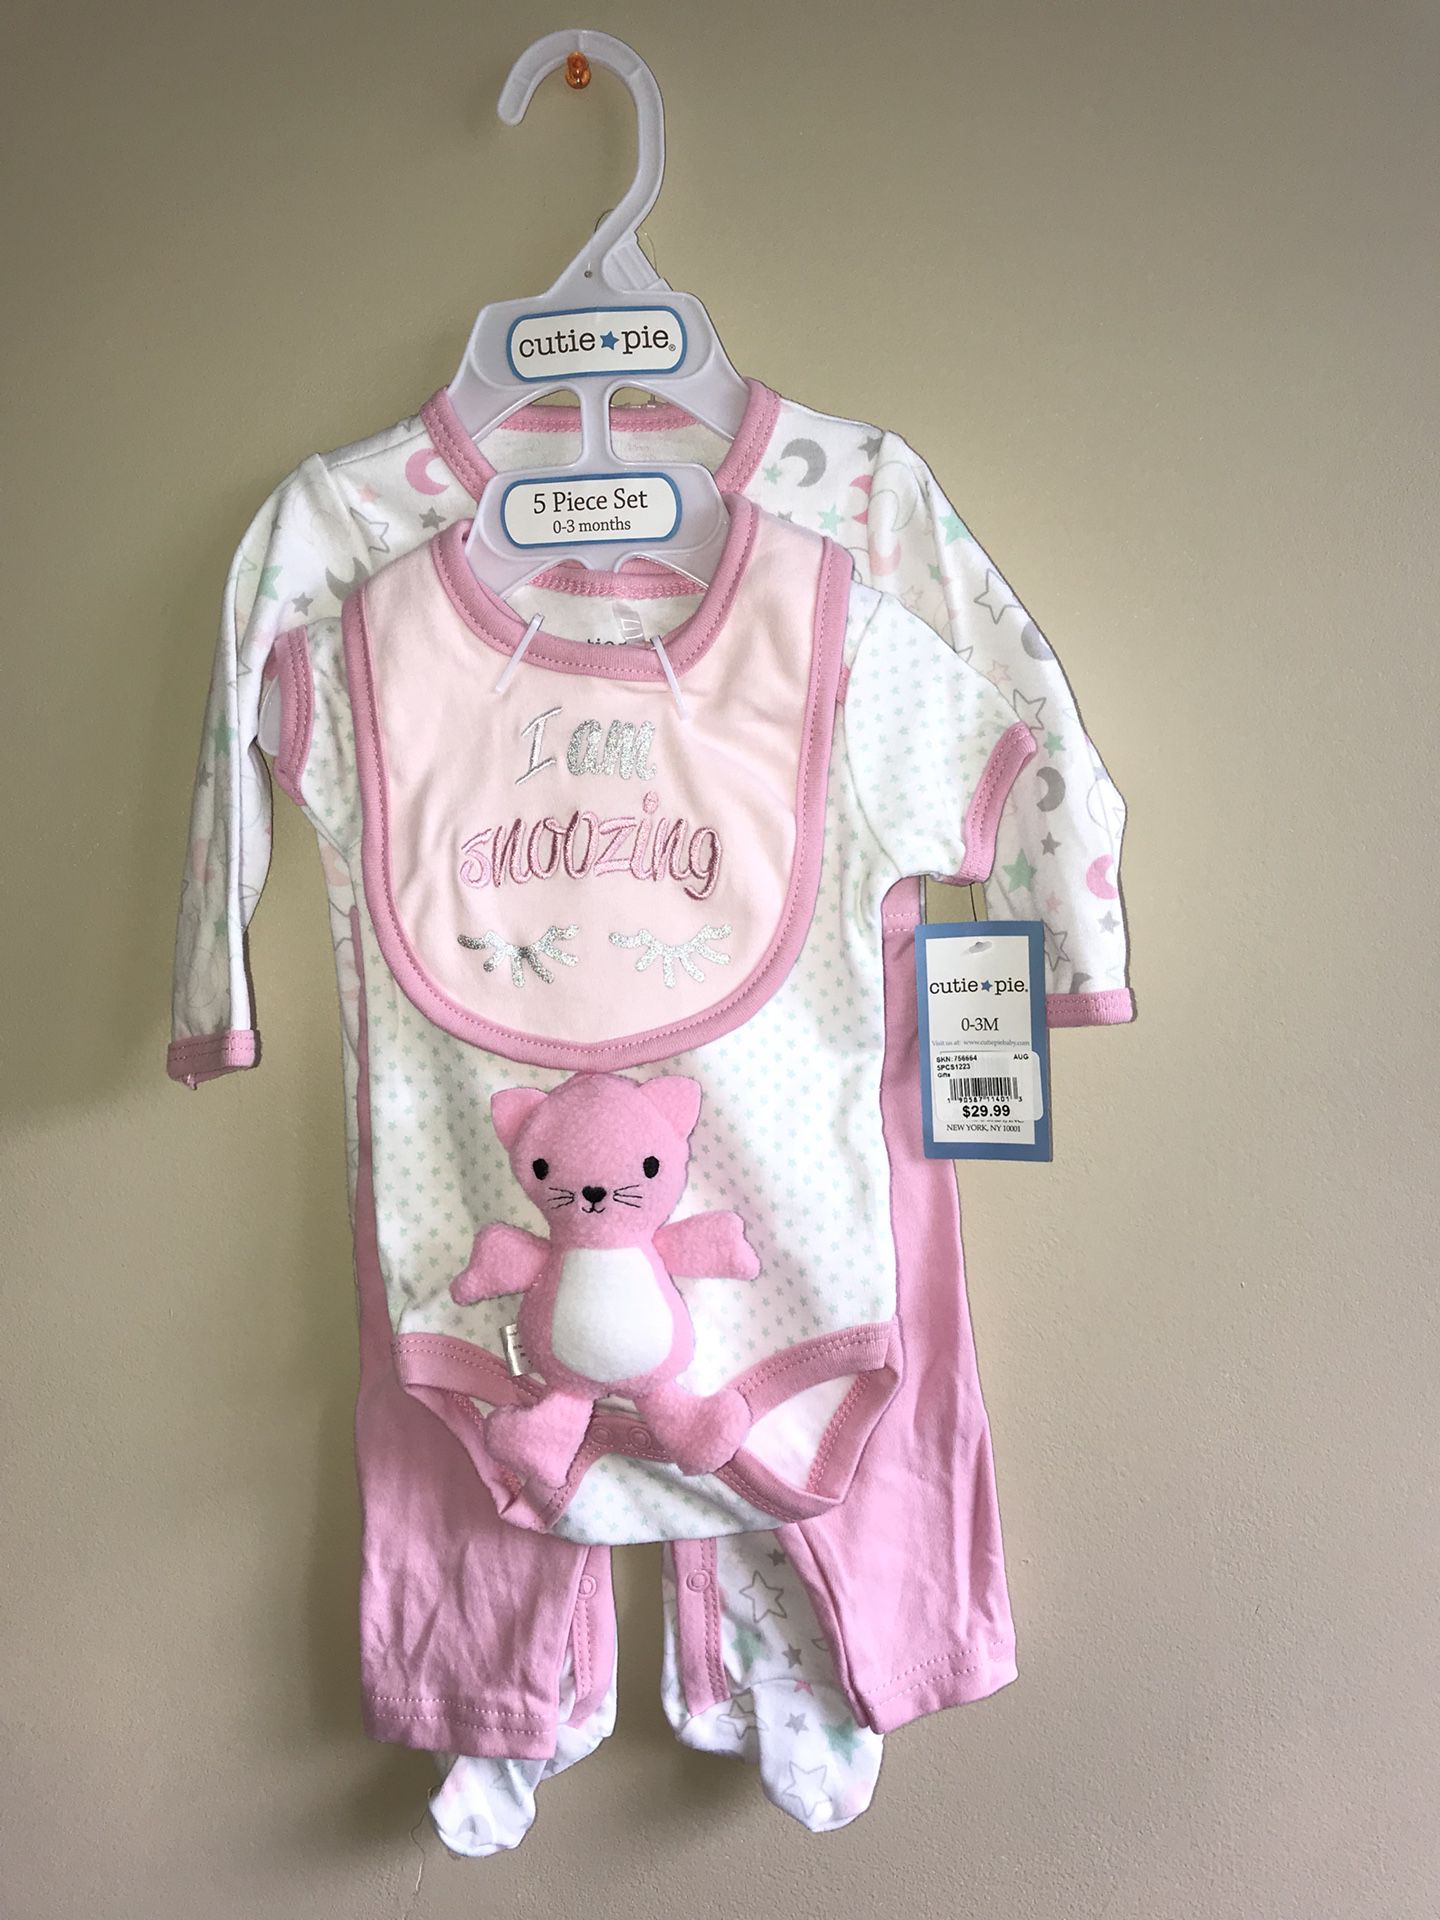 Baby girl 5 piece (0-3months) New with tags